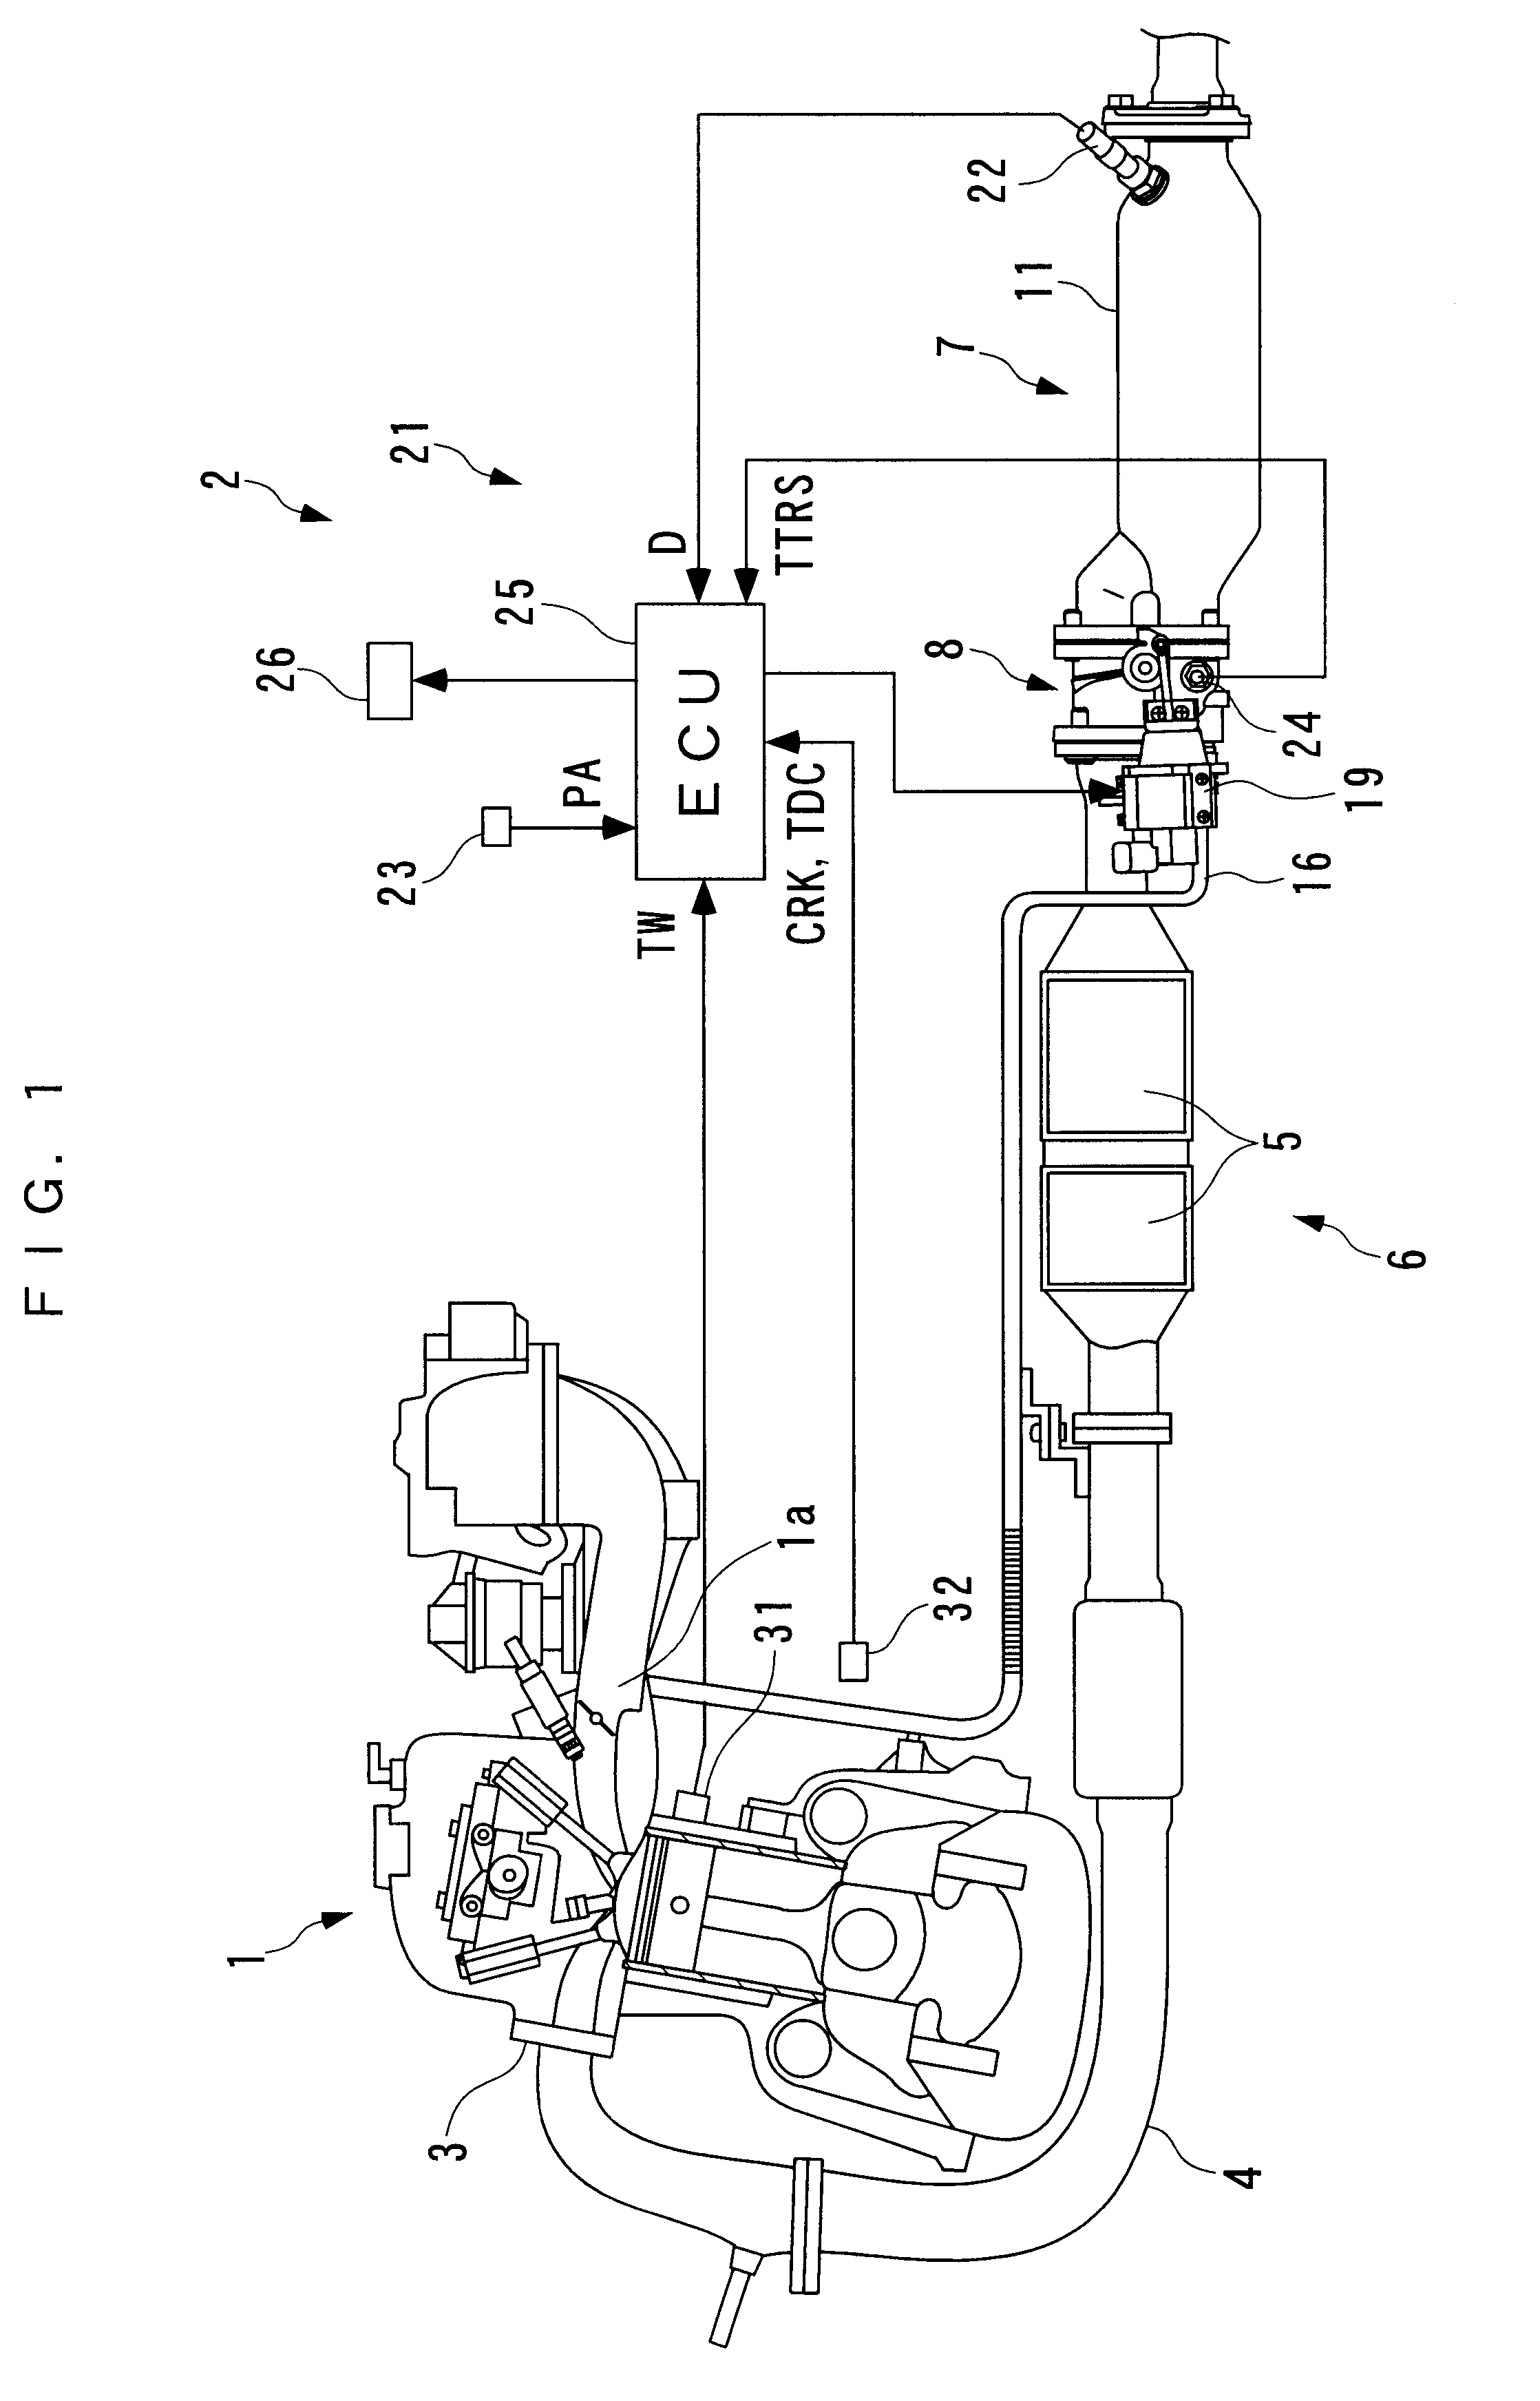 Fault determining apparatus for exhaust passage switching valve